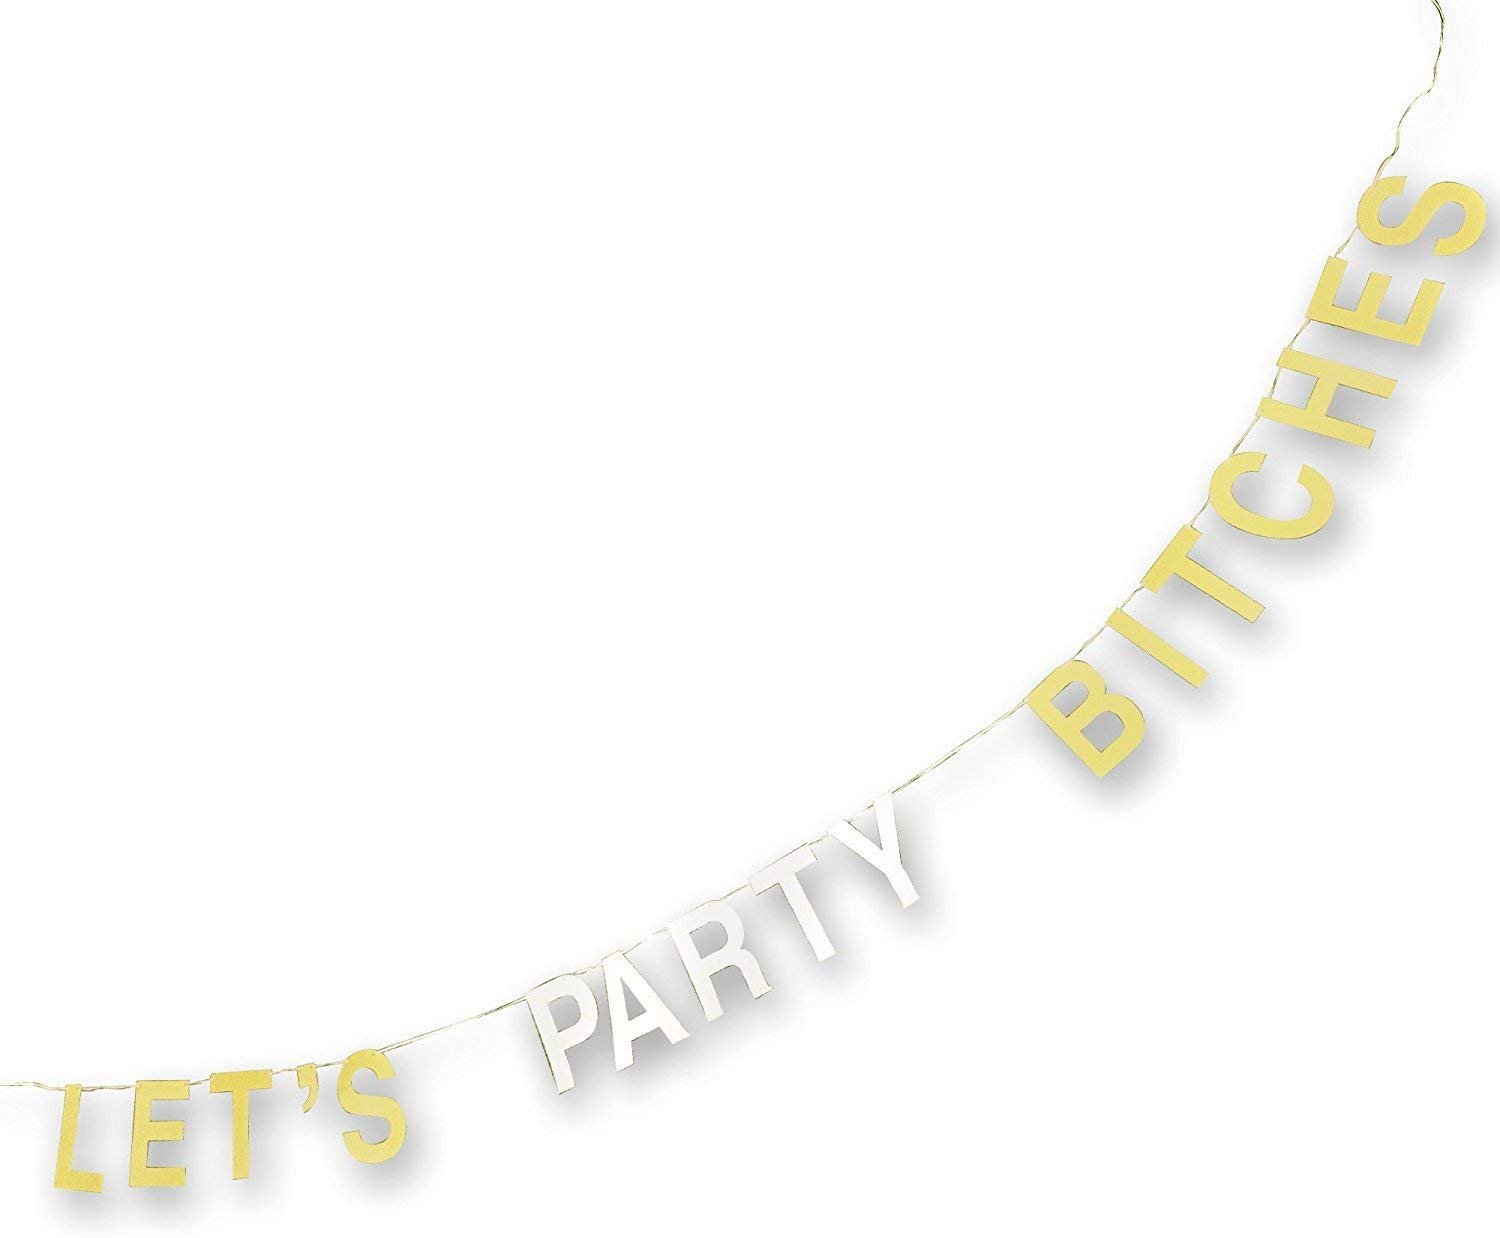 Buy JennyGems Lets Party - Bachelorette Party Supplies Decorations - Funny  Adult Banner Series - Bride, Shower, Birthday Celebration, Girls Weekend - Lets  Party Bitches Online at Lowest Price in Nigeria. 726195430